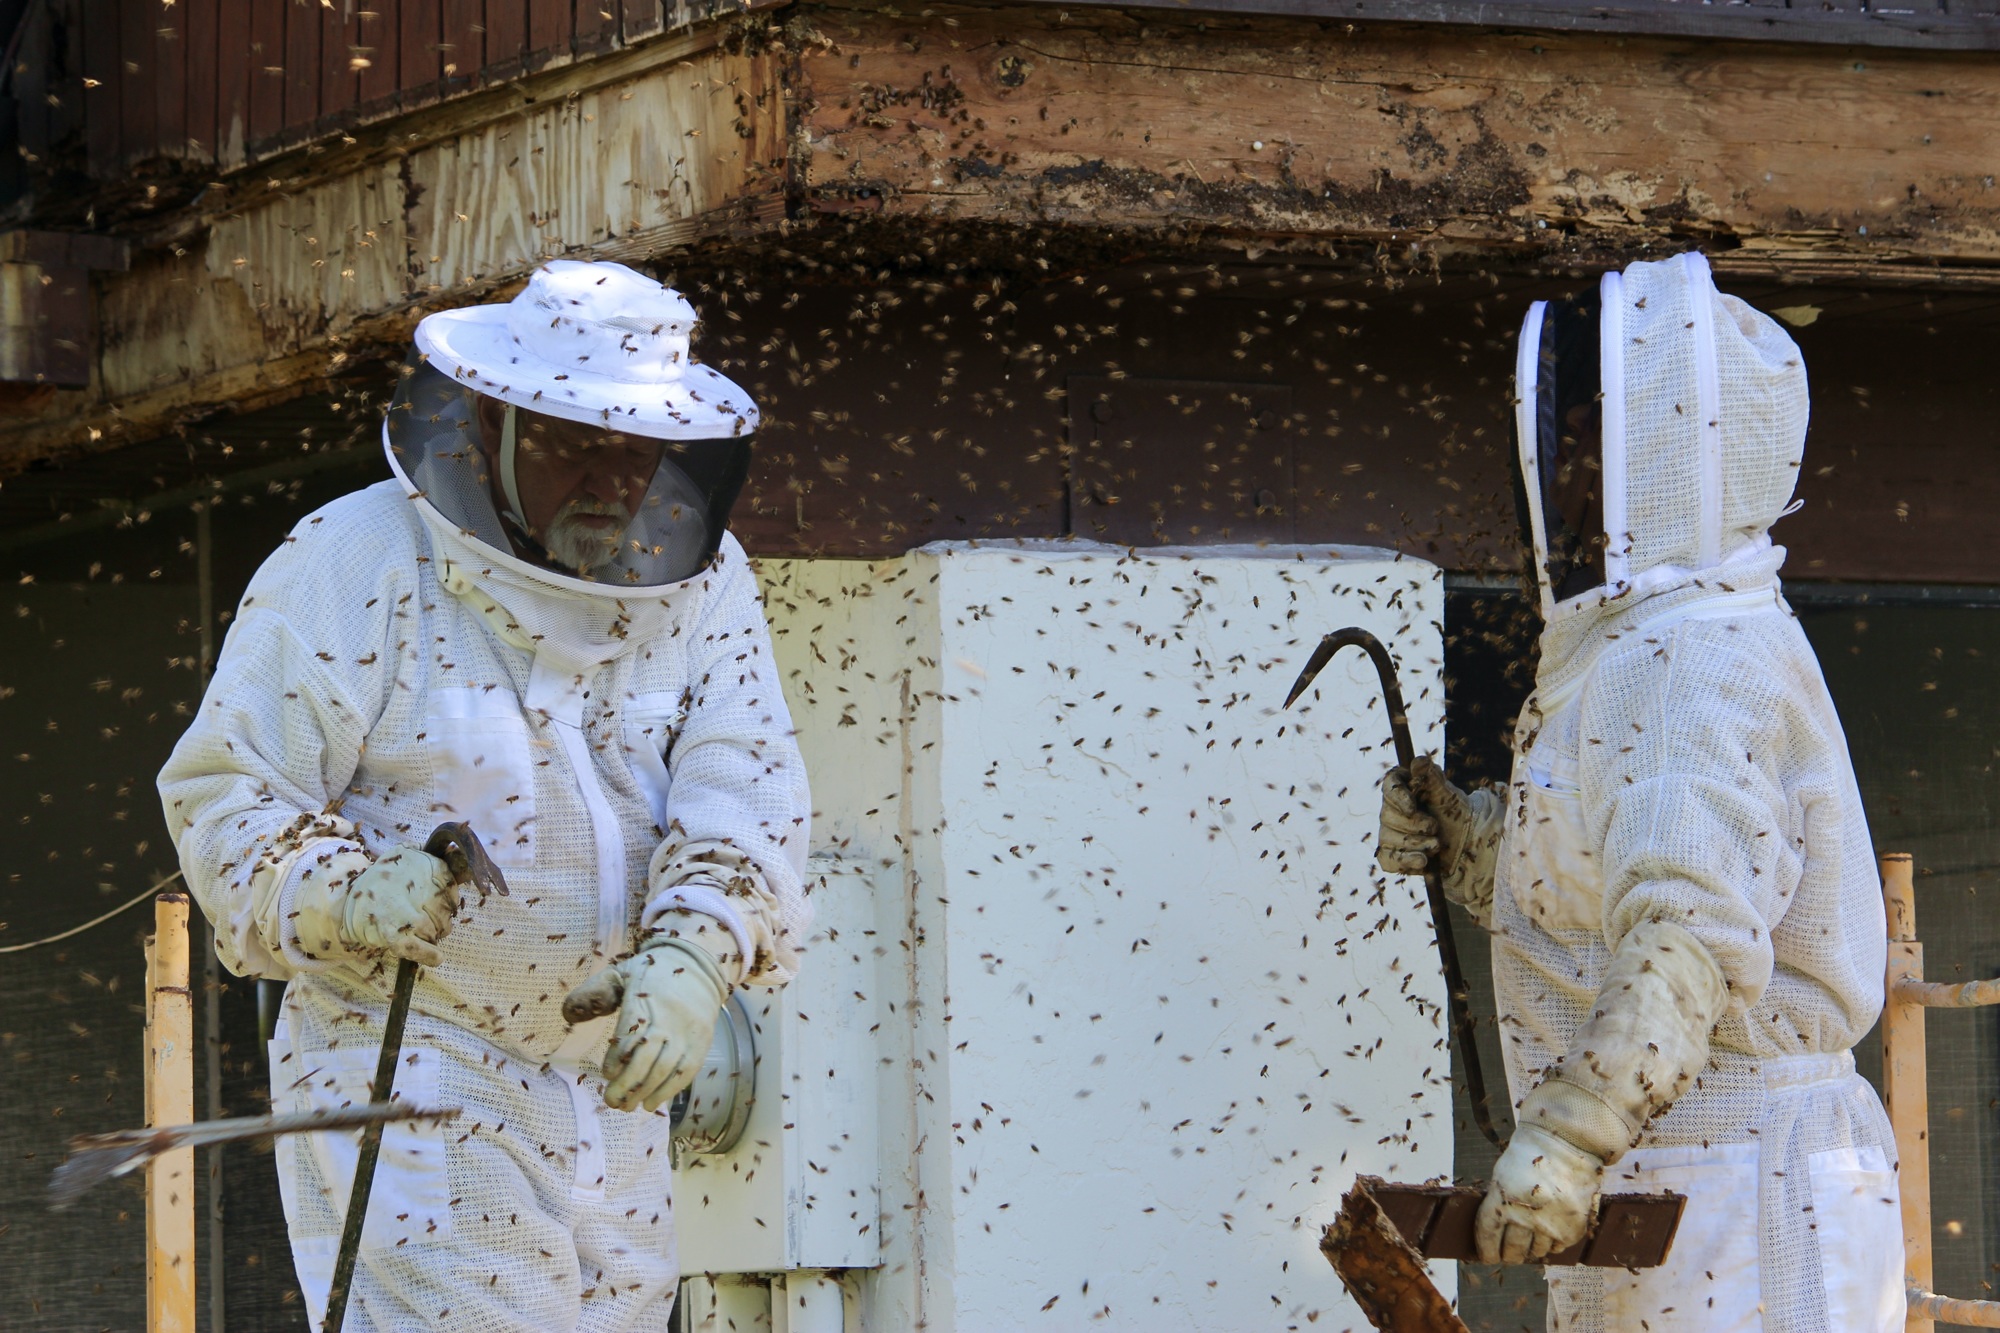 Bees swarm Tony Woodard and Amine Bensaid. (Photo by Lesley Dwyer)